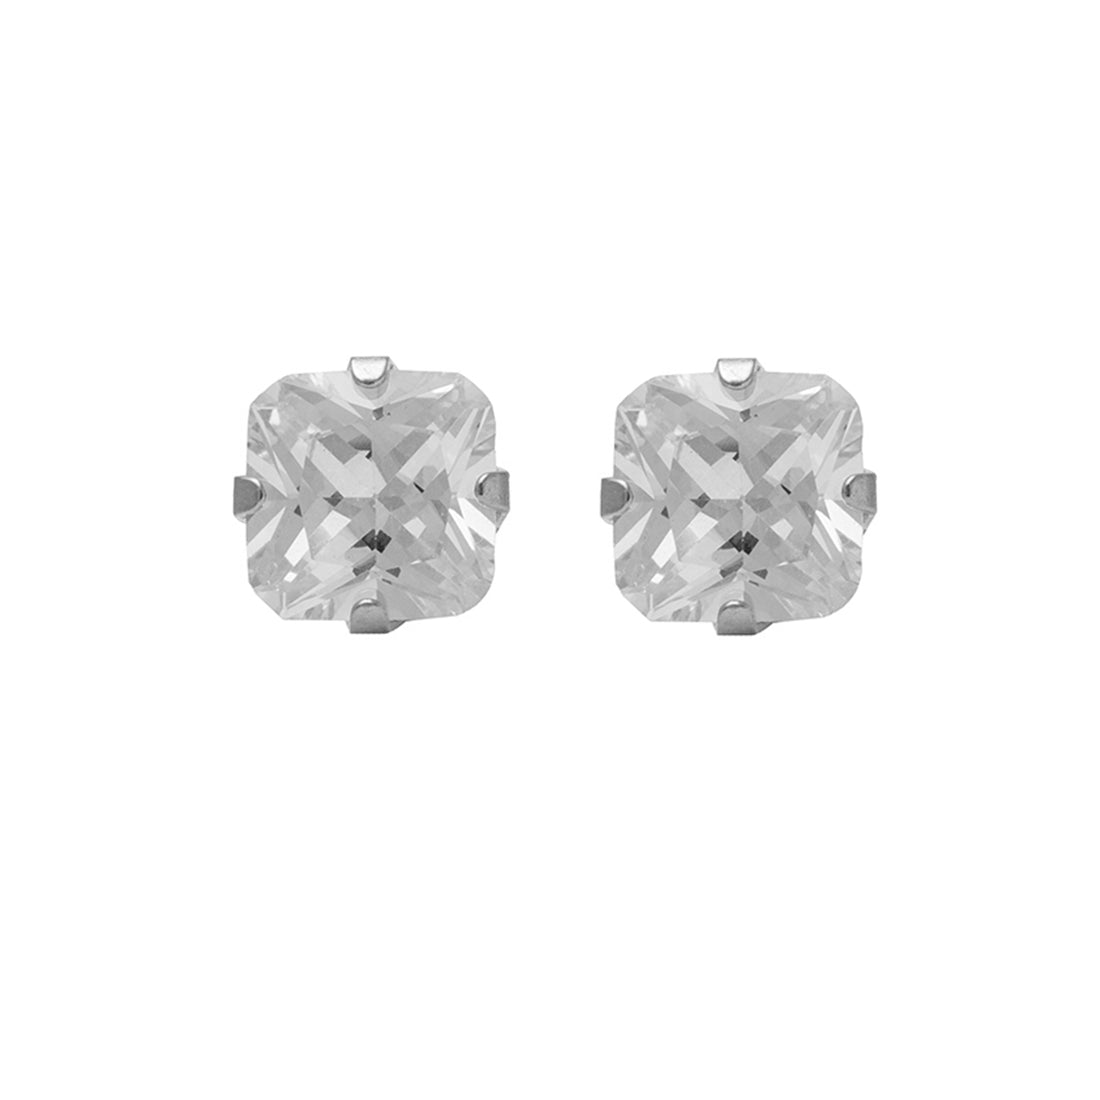 5*5MM Cubic Zirconia Princess cut Allergy Free Stainless Steel Ear Studs | Ideal for everyday wear